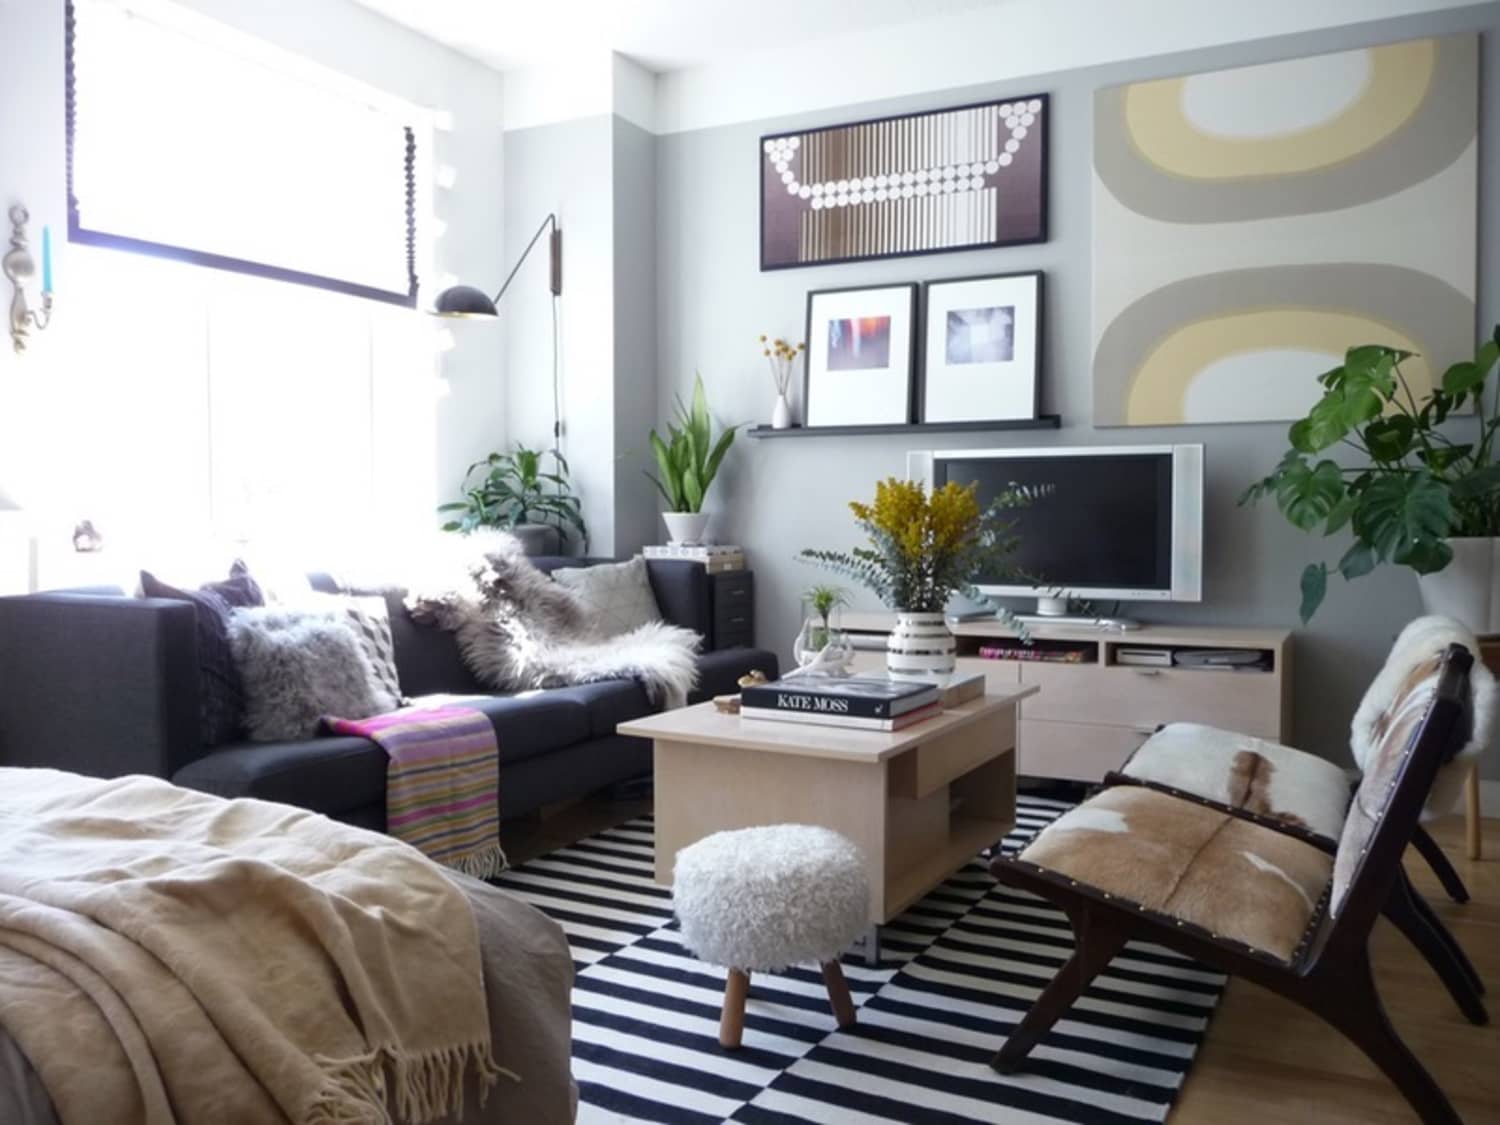 How To Efficiently Arrange Furniture In A Studio apartment